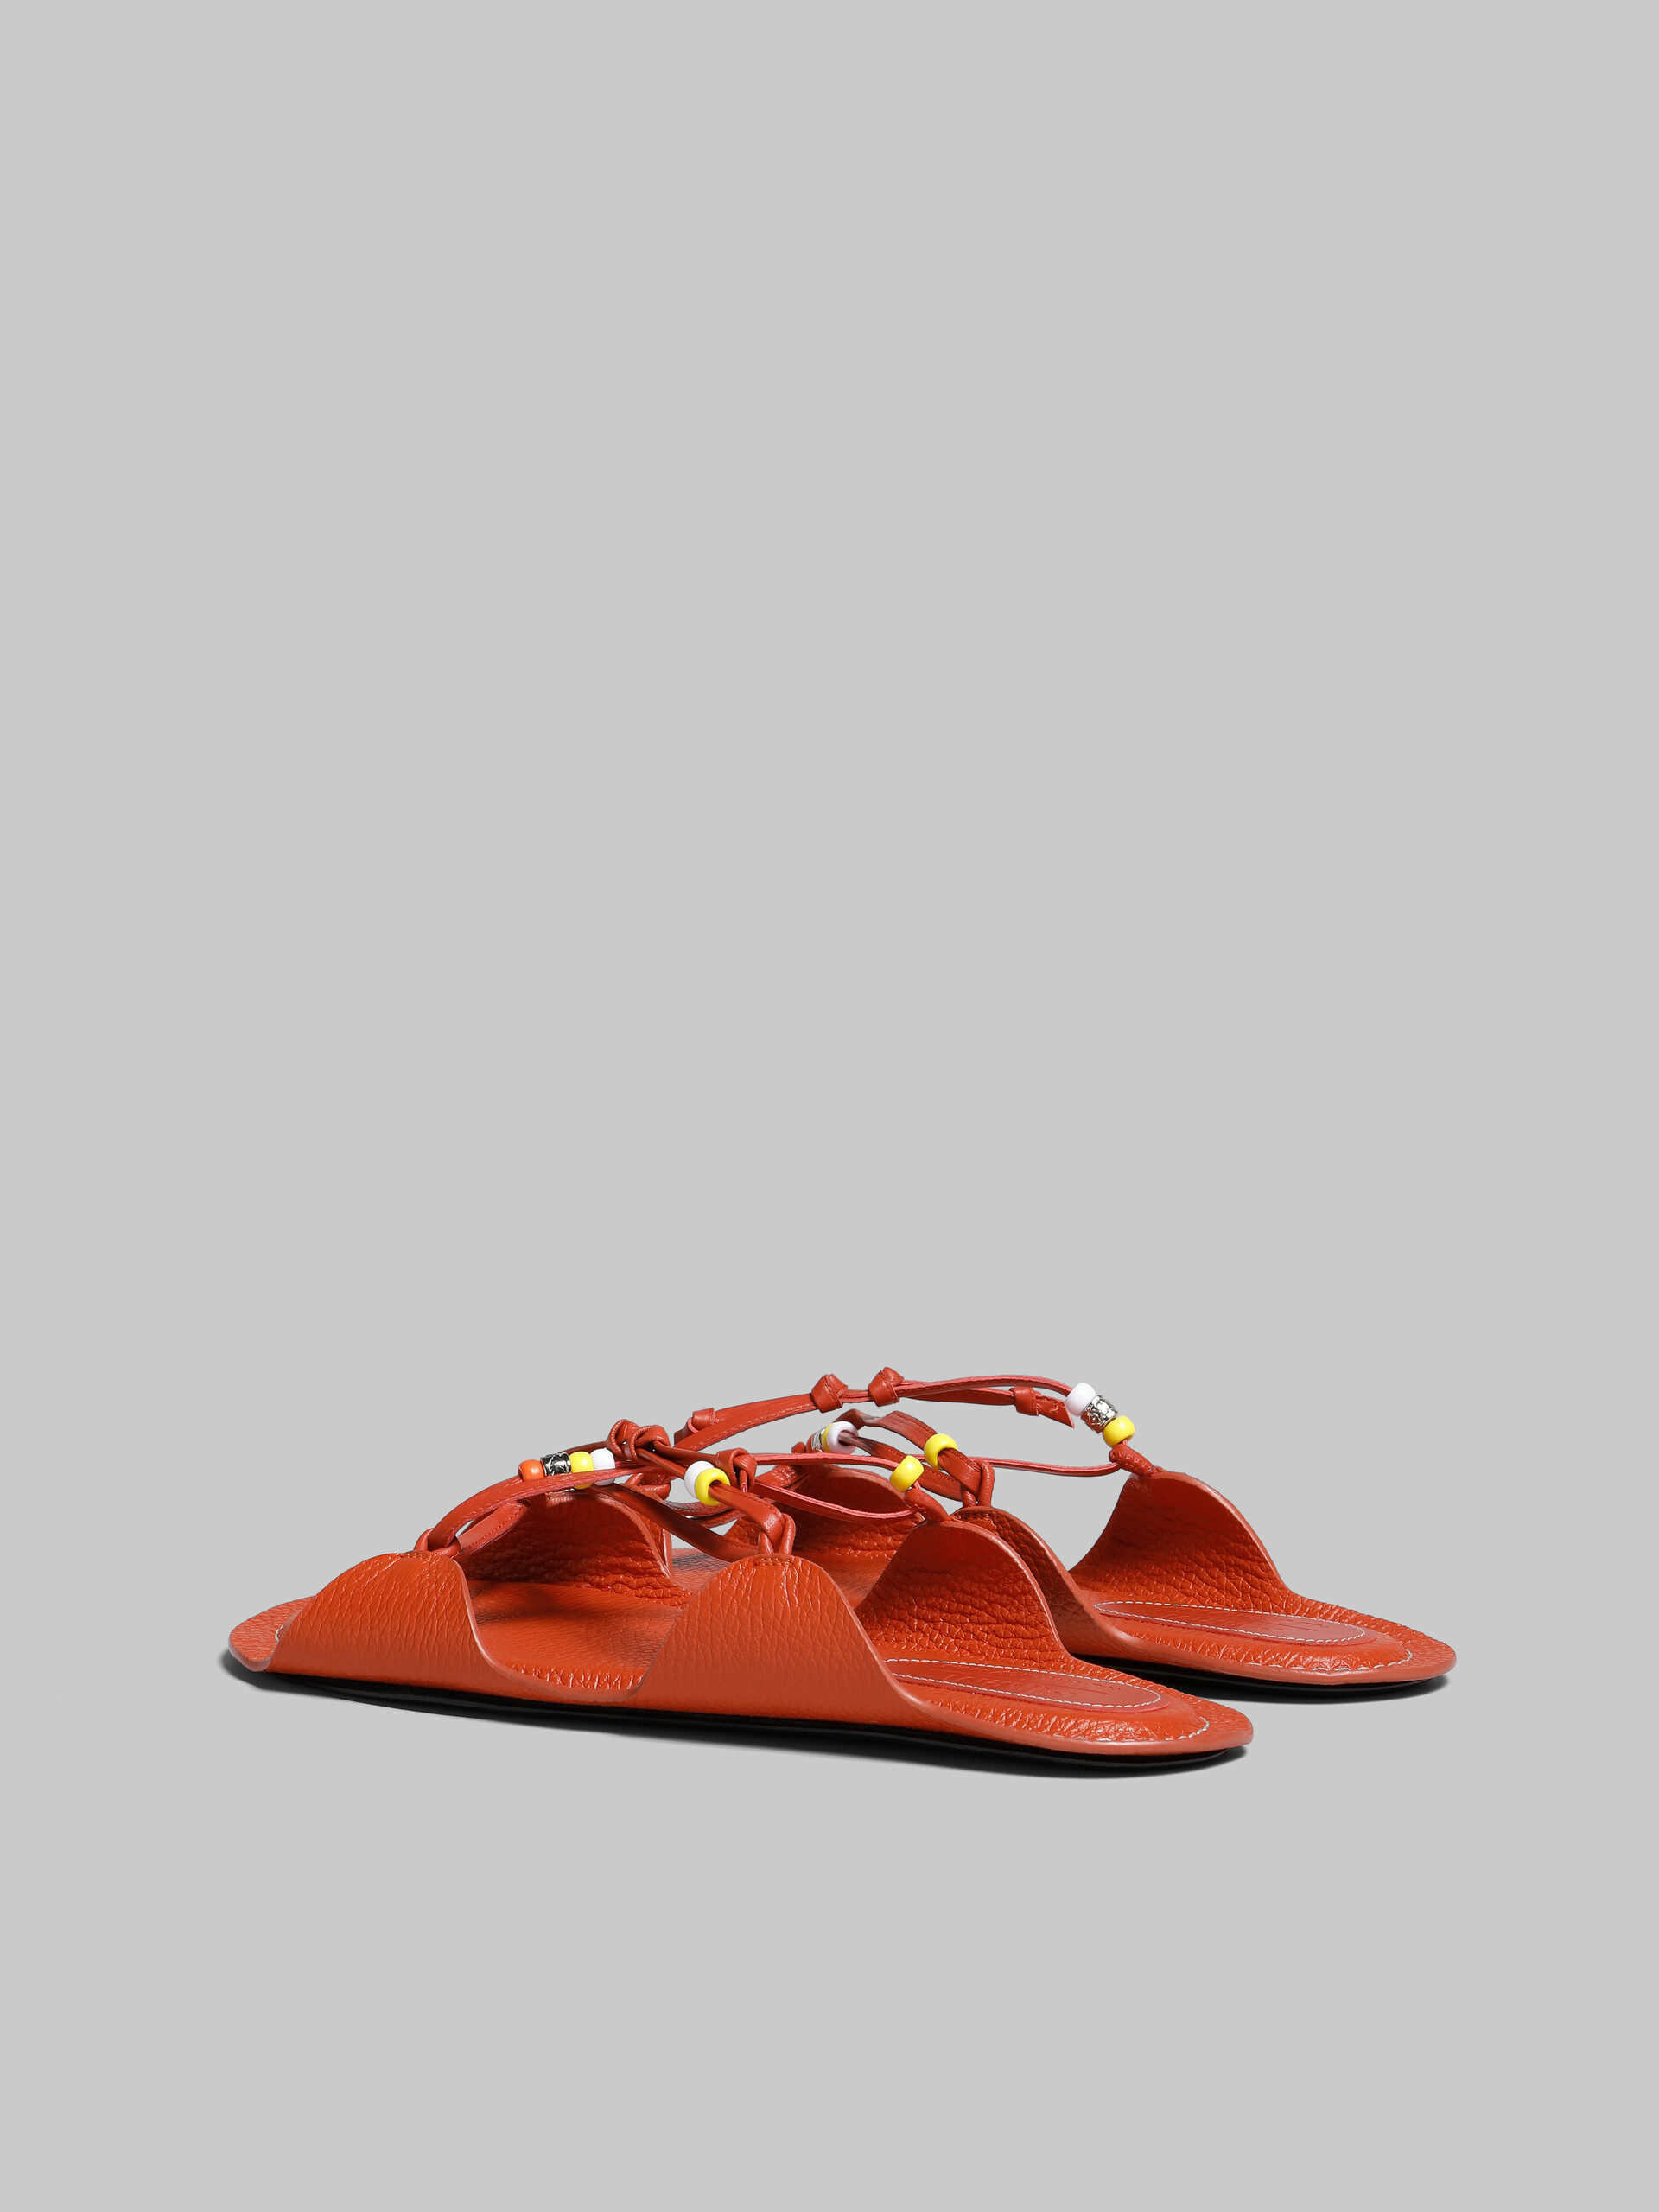 Marni x No Vacancy Inn - Brick red leather sandals with beads - Sandals - Image 3